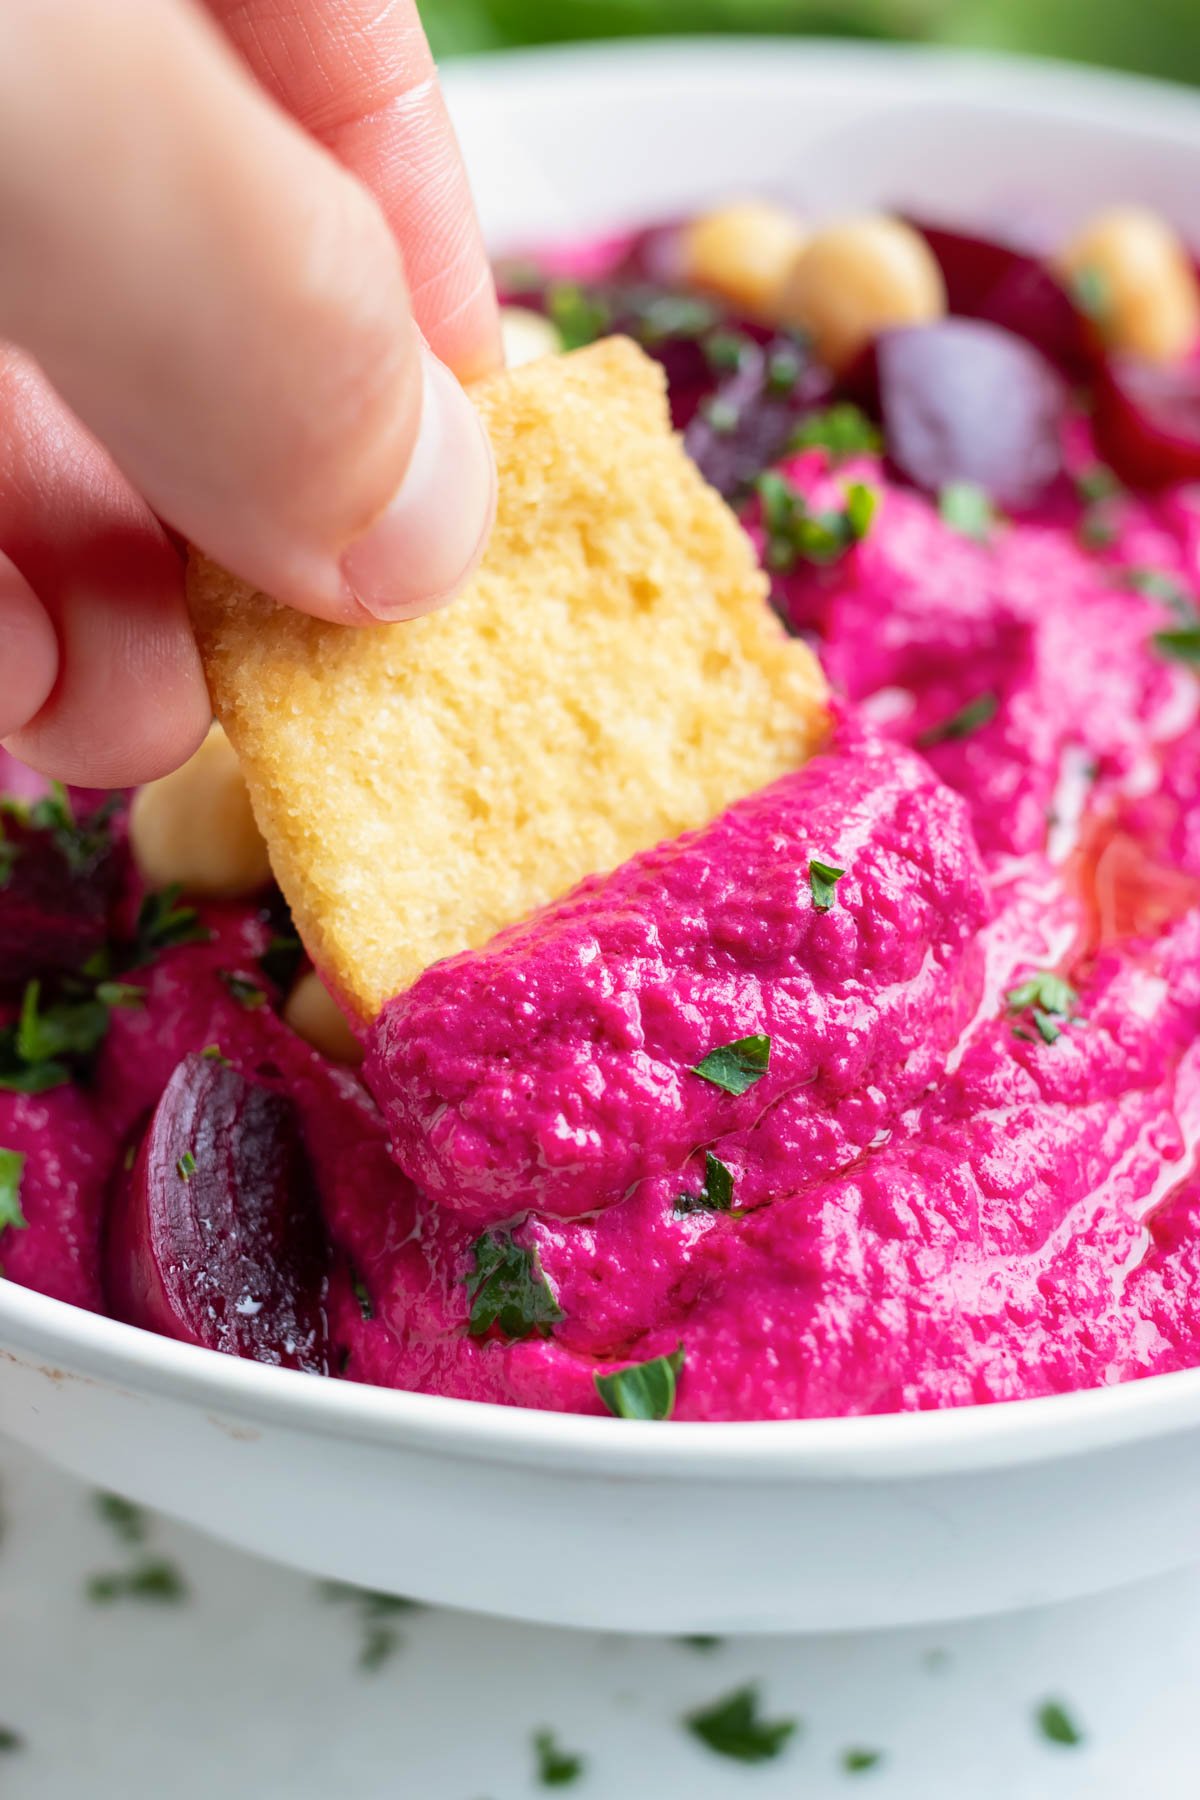 A gluten-free cracker is dipped into this creamy, homemade hummus.